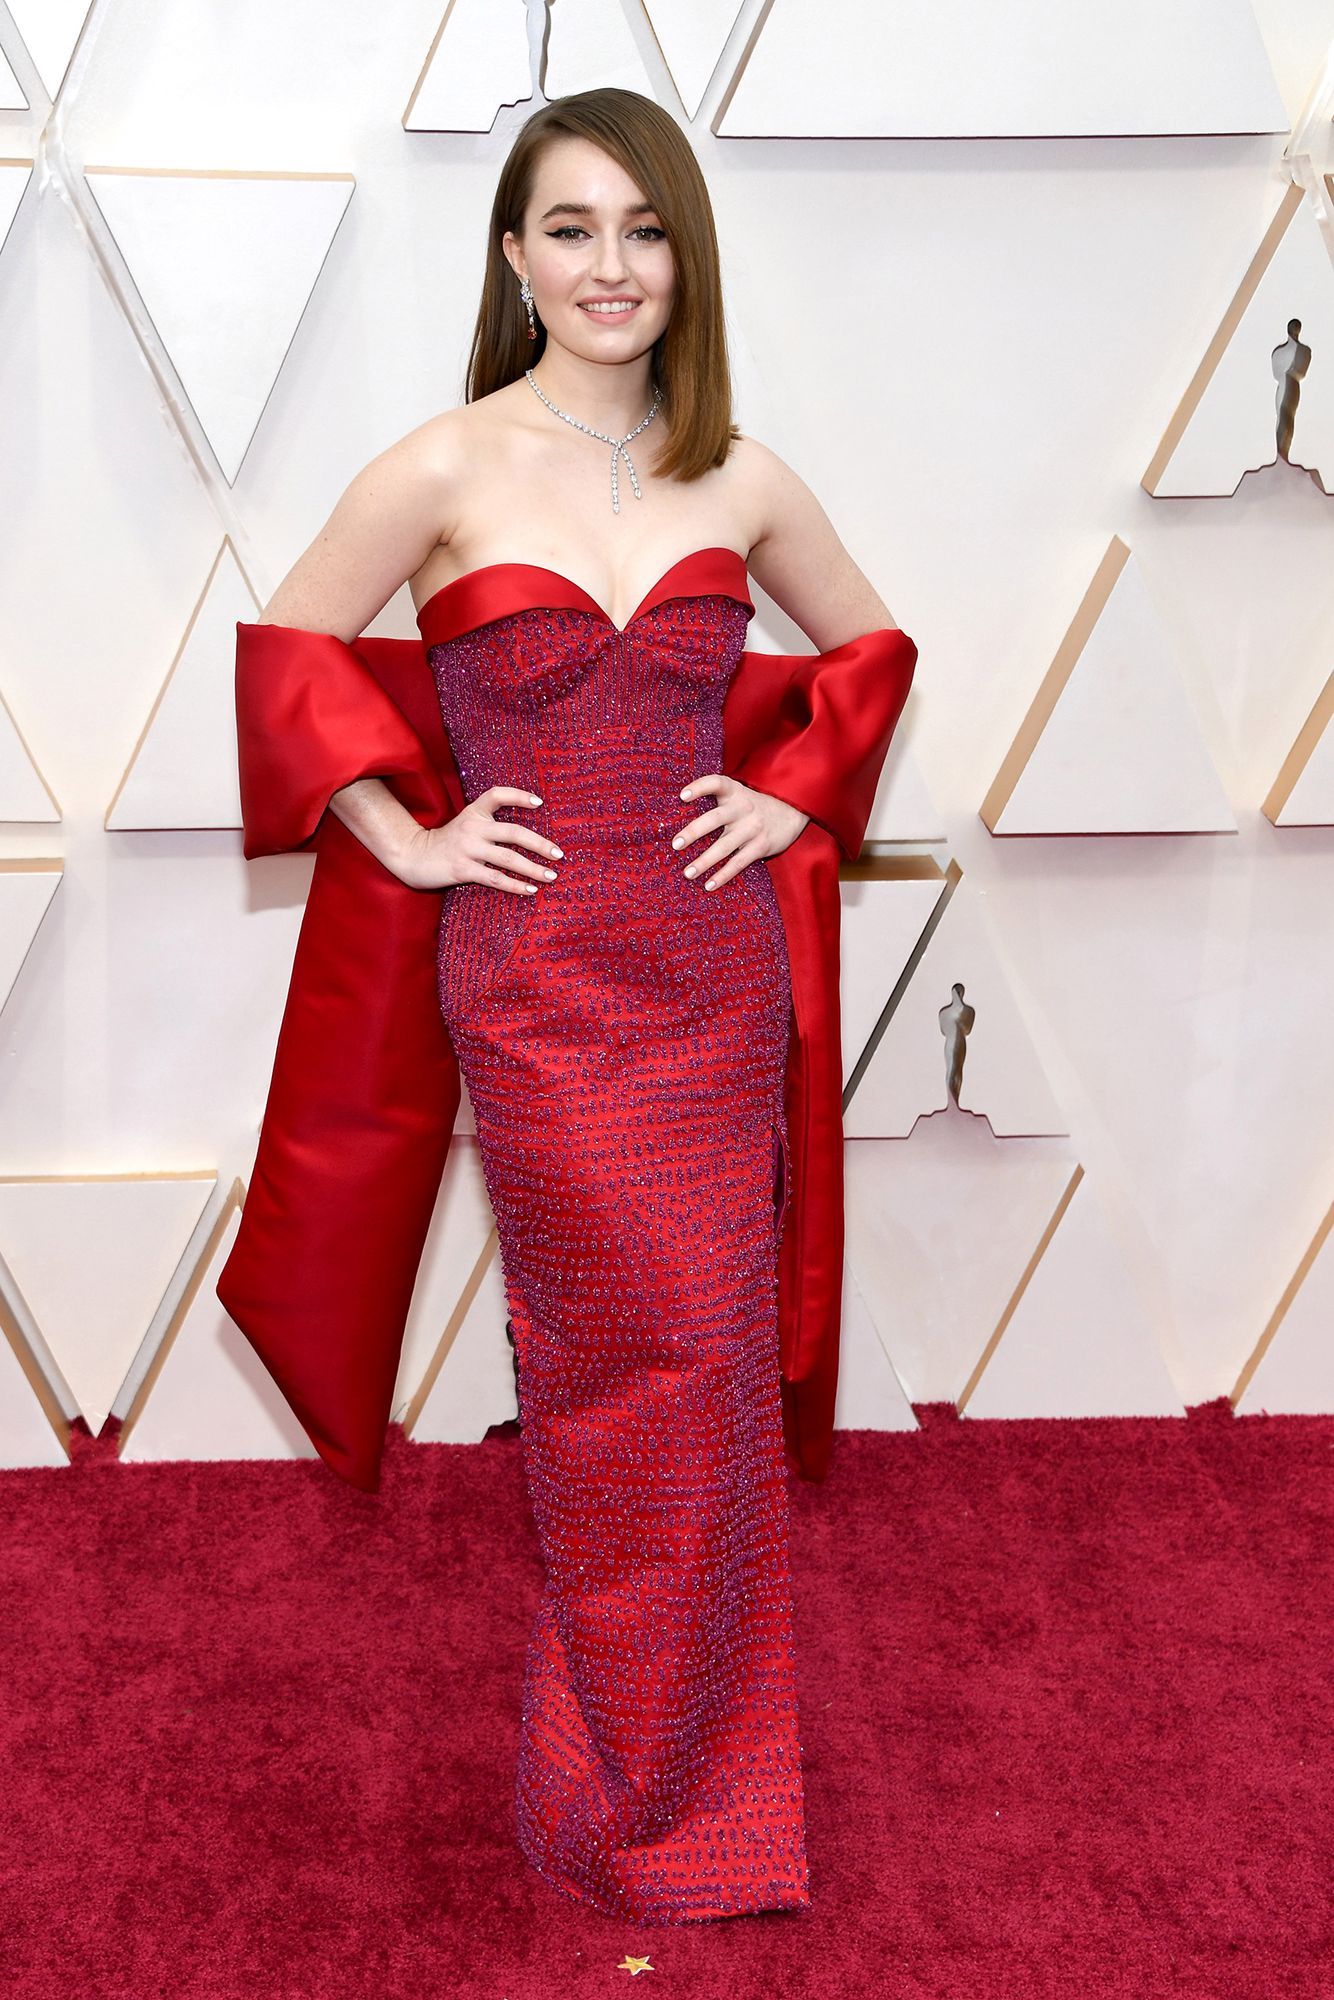 Can the Oscars red carpet ever be sustainable?